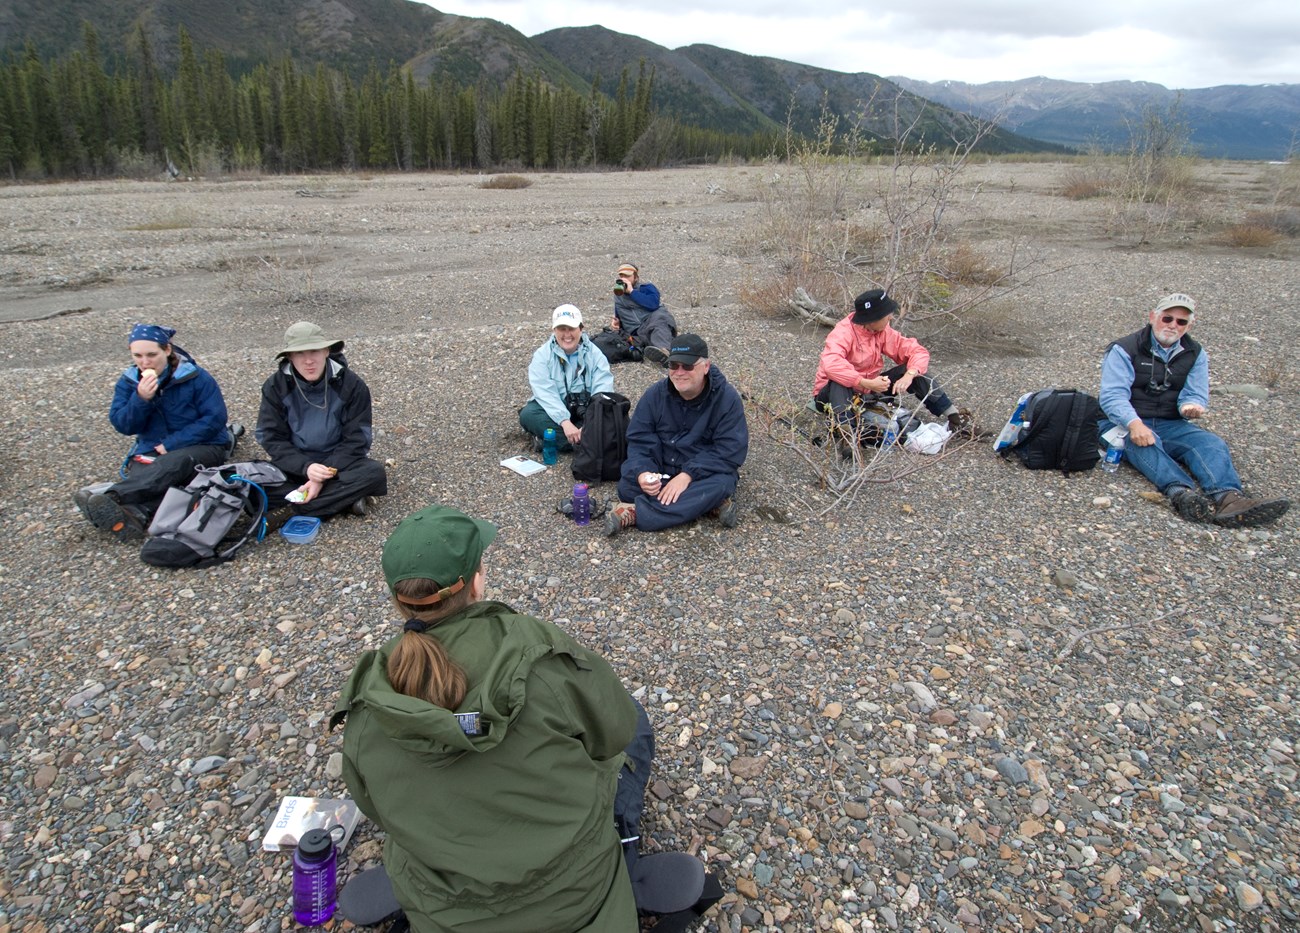 Park Ranger and a group of hikers having lunch